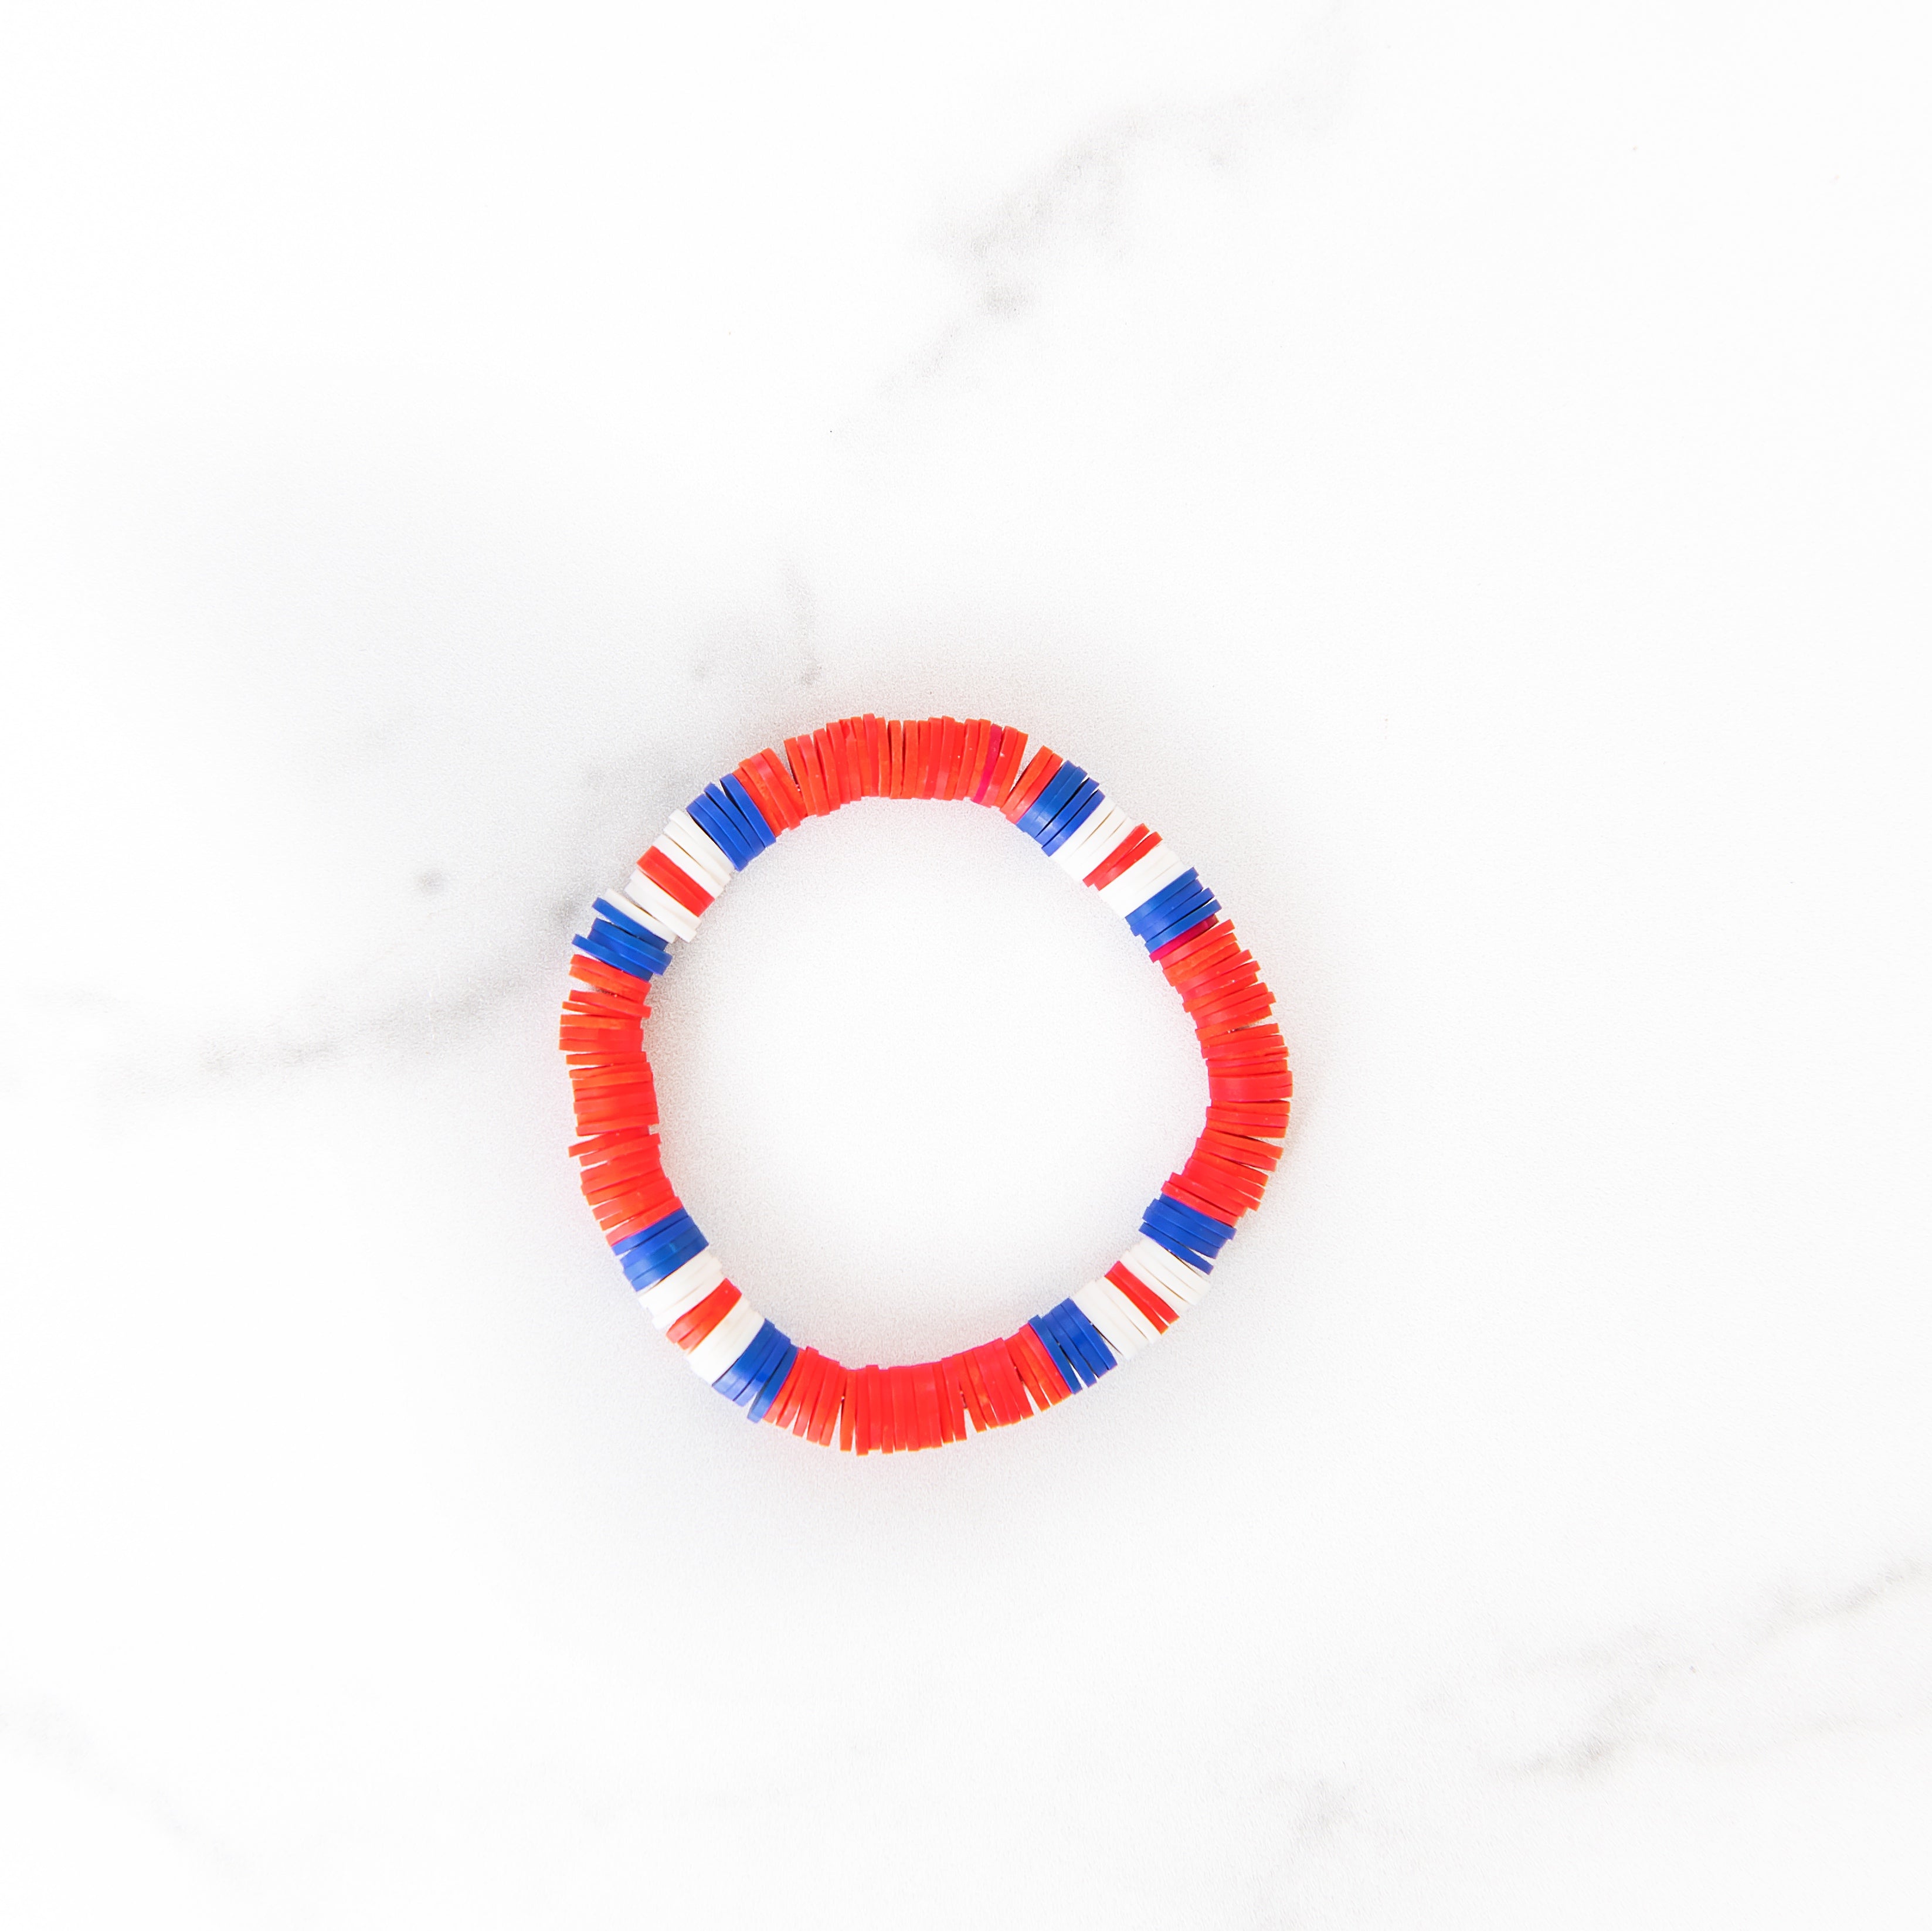 Red + Blue and White Polymer Clay Bracelet